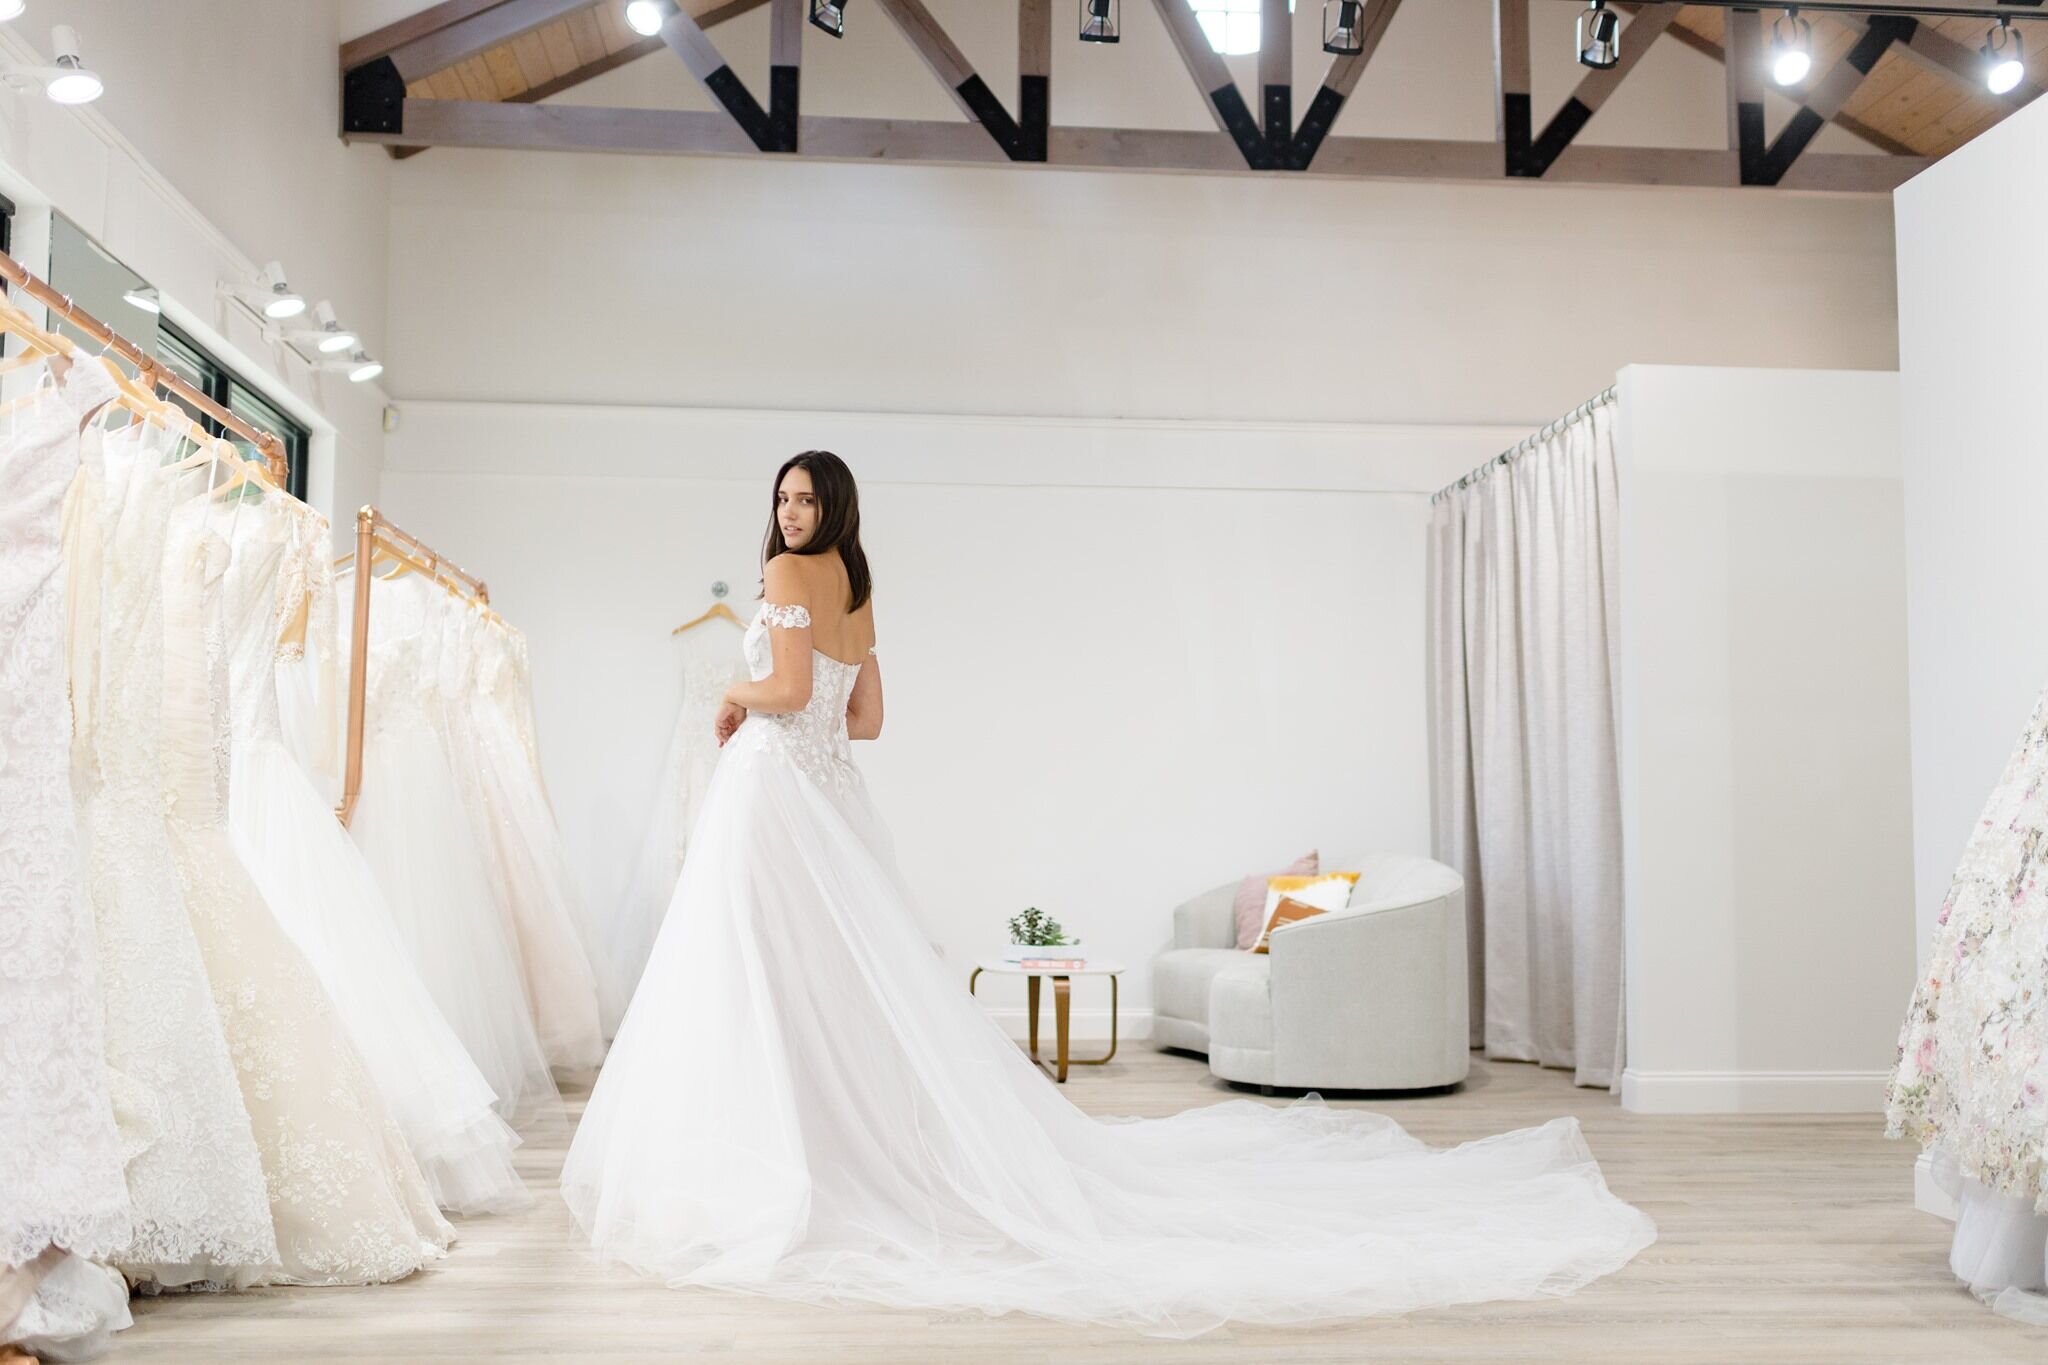 The Bridal Finery   How To Sell Your Wedding Dress